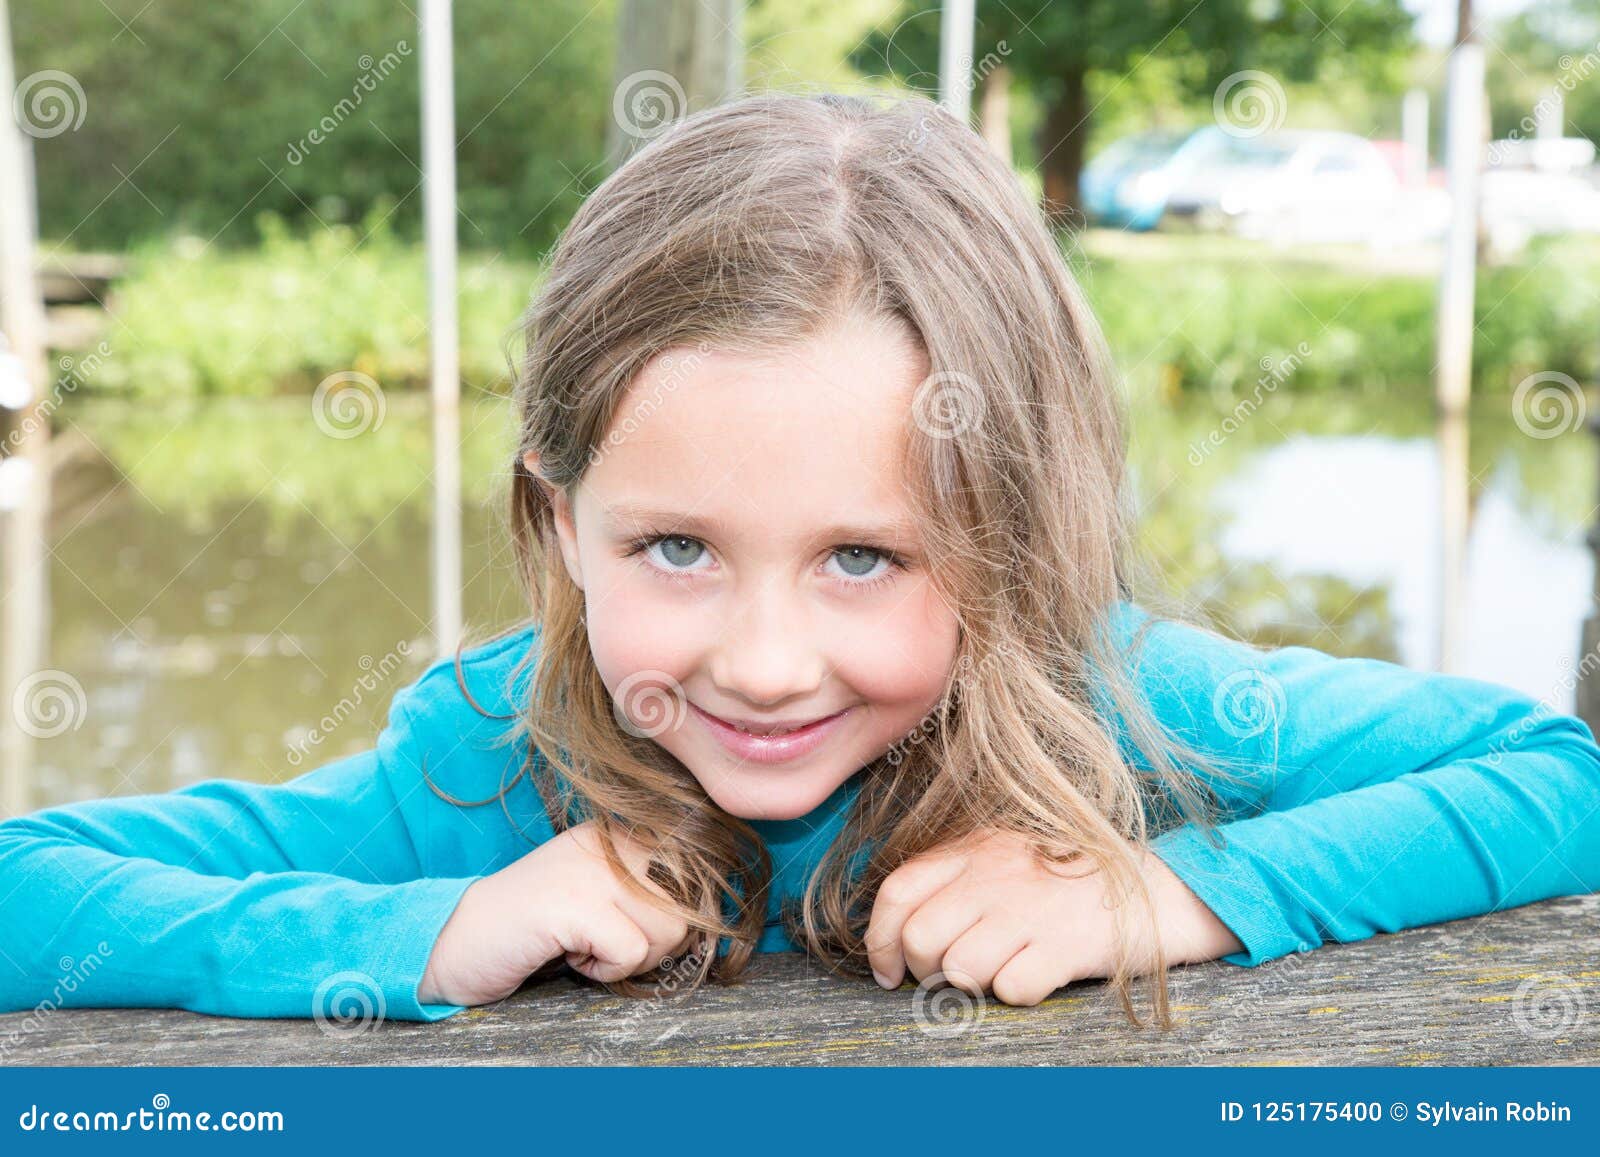 Cute Child Girl Outdoor Riverside in Summer Stock Photo - Image of ...